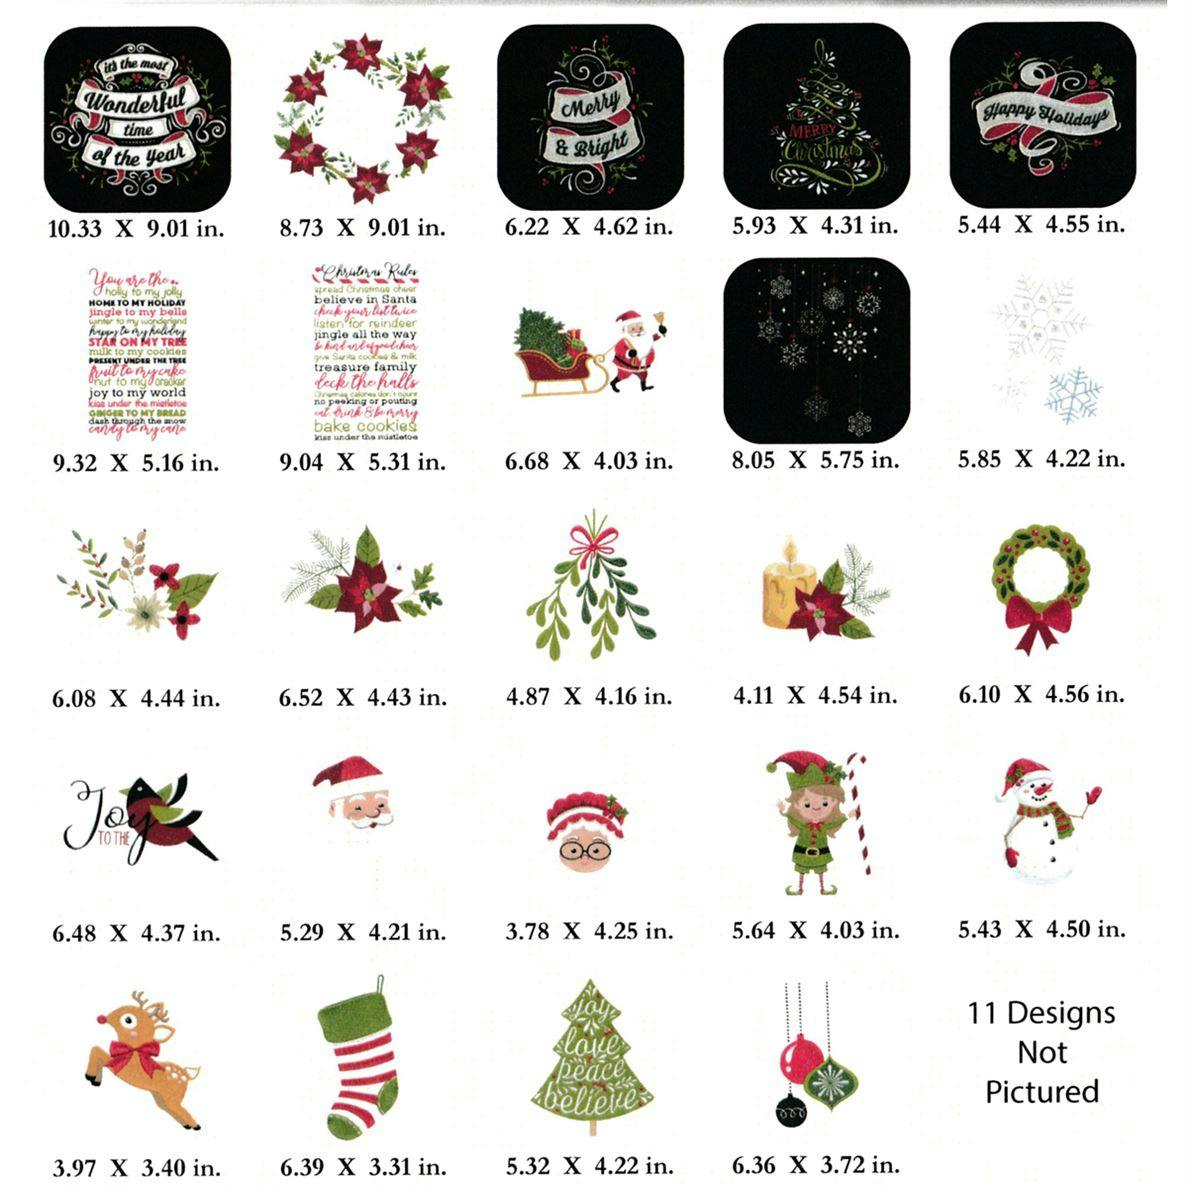 Designs in Holly Jolly collection